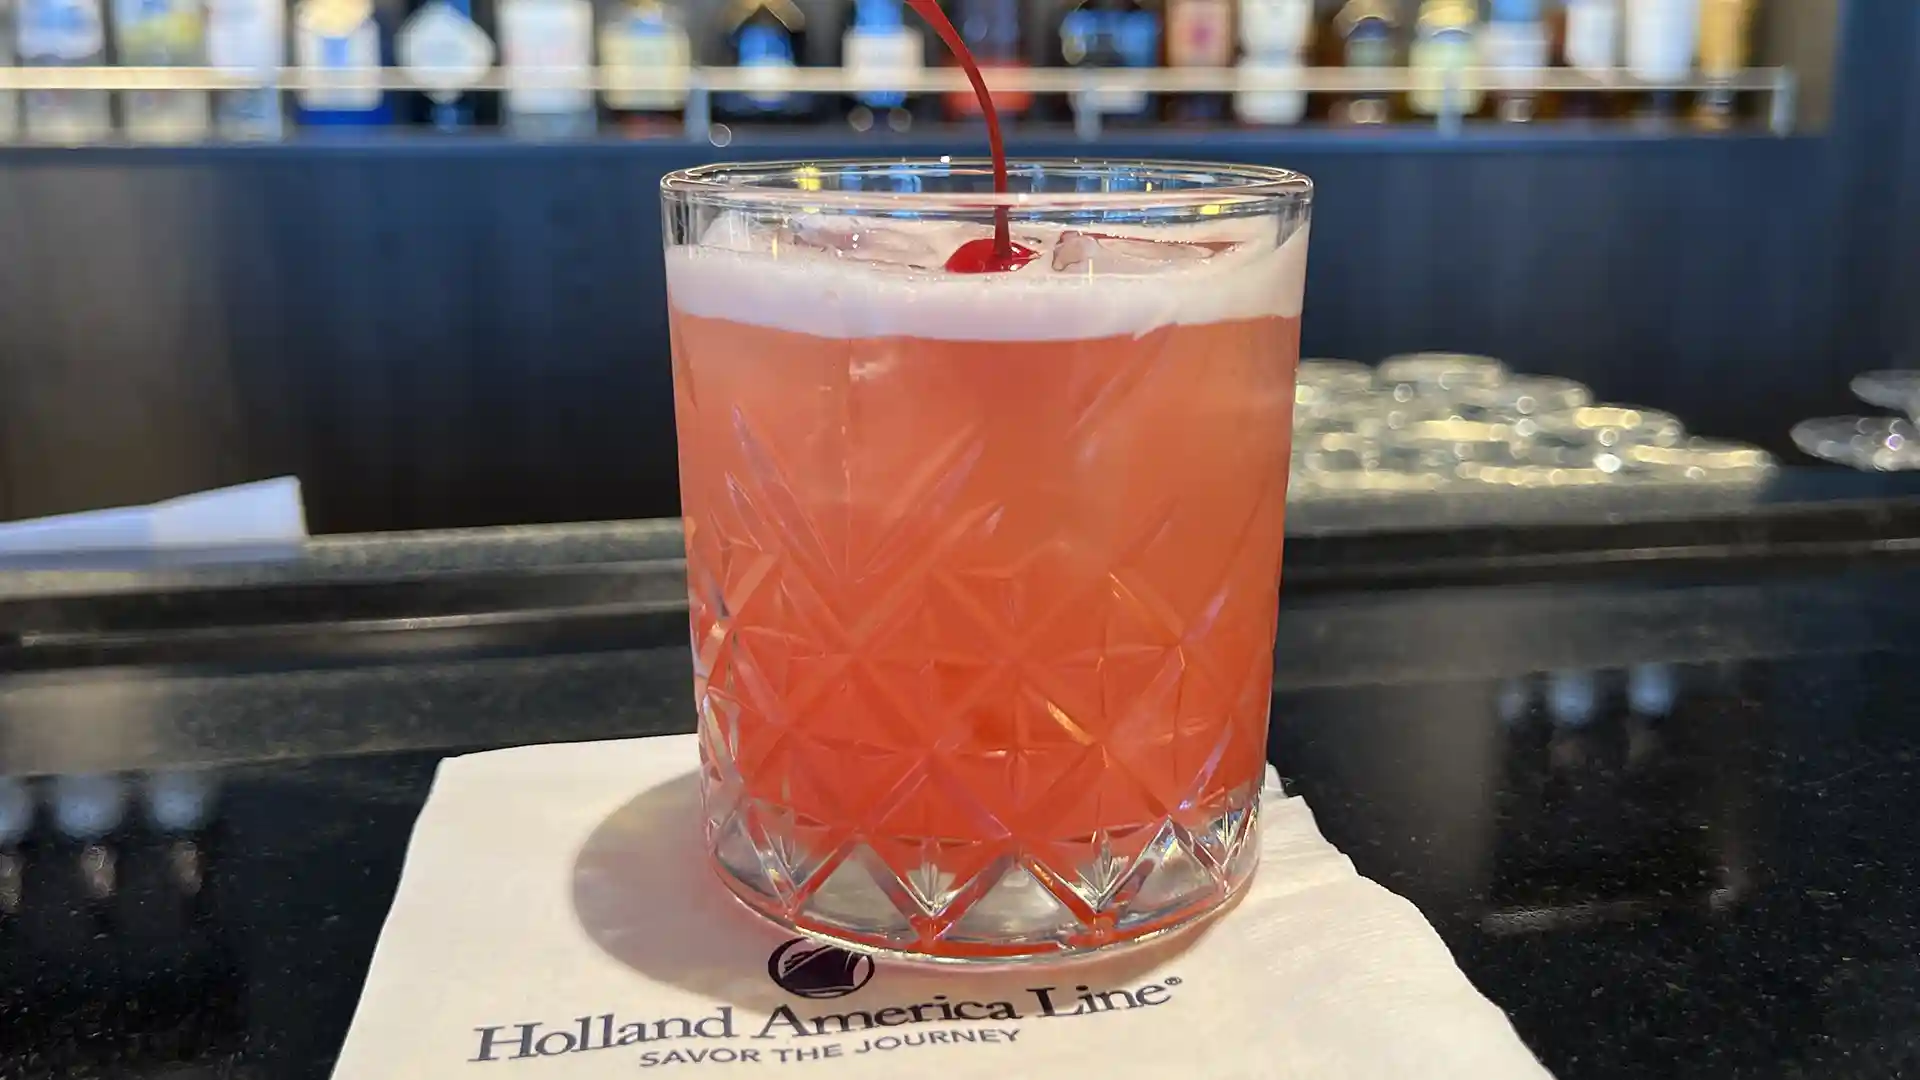 Holland America Line's Valentine's Day cocktail with cherry on top.